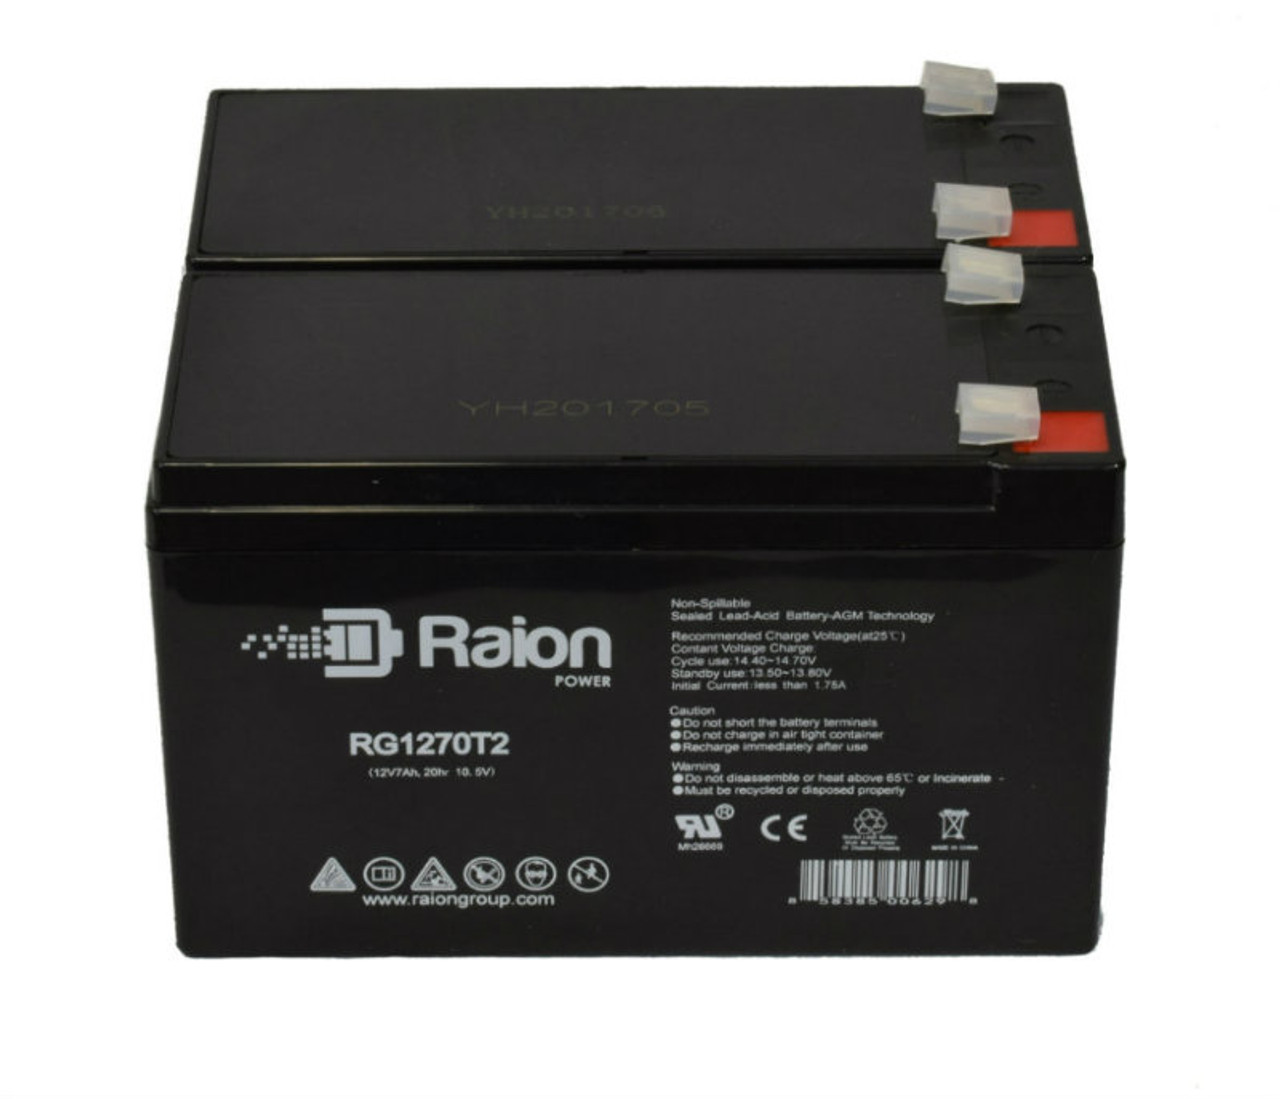 Raion Power Replacement 12V 7Ah Battery for Stannah Siena 600 Straight Stairlift - 2 Pack